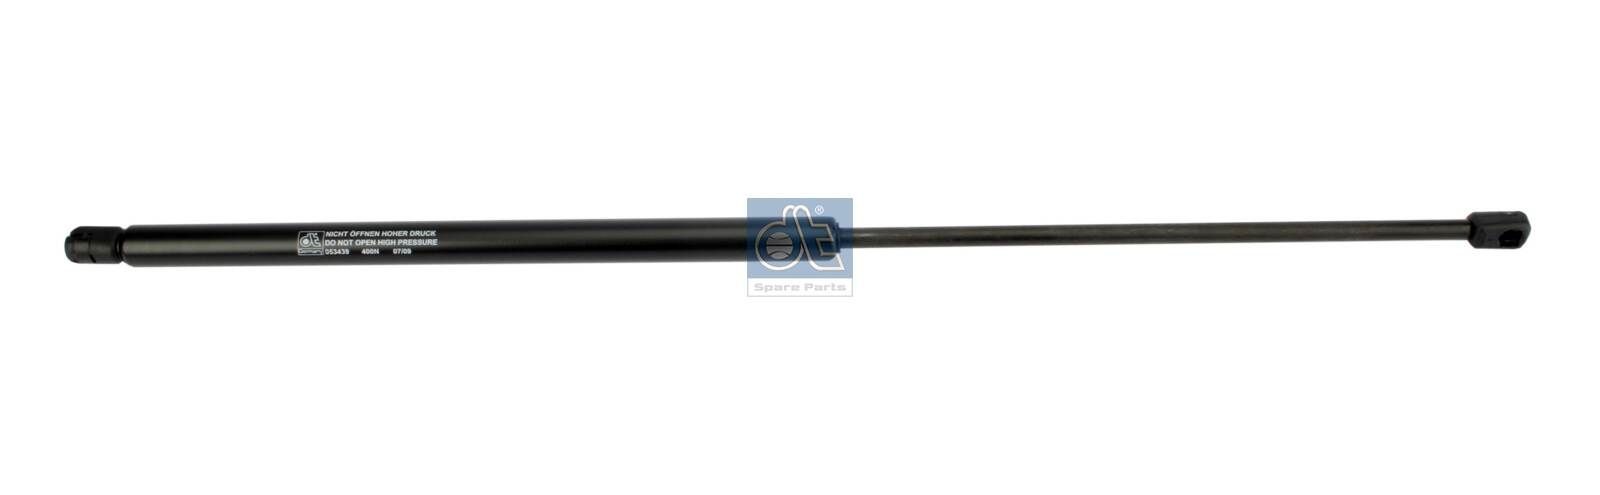 184515 DT Spare Parts 1.23259 Gas Spring 2 031 872